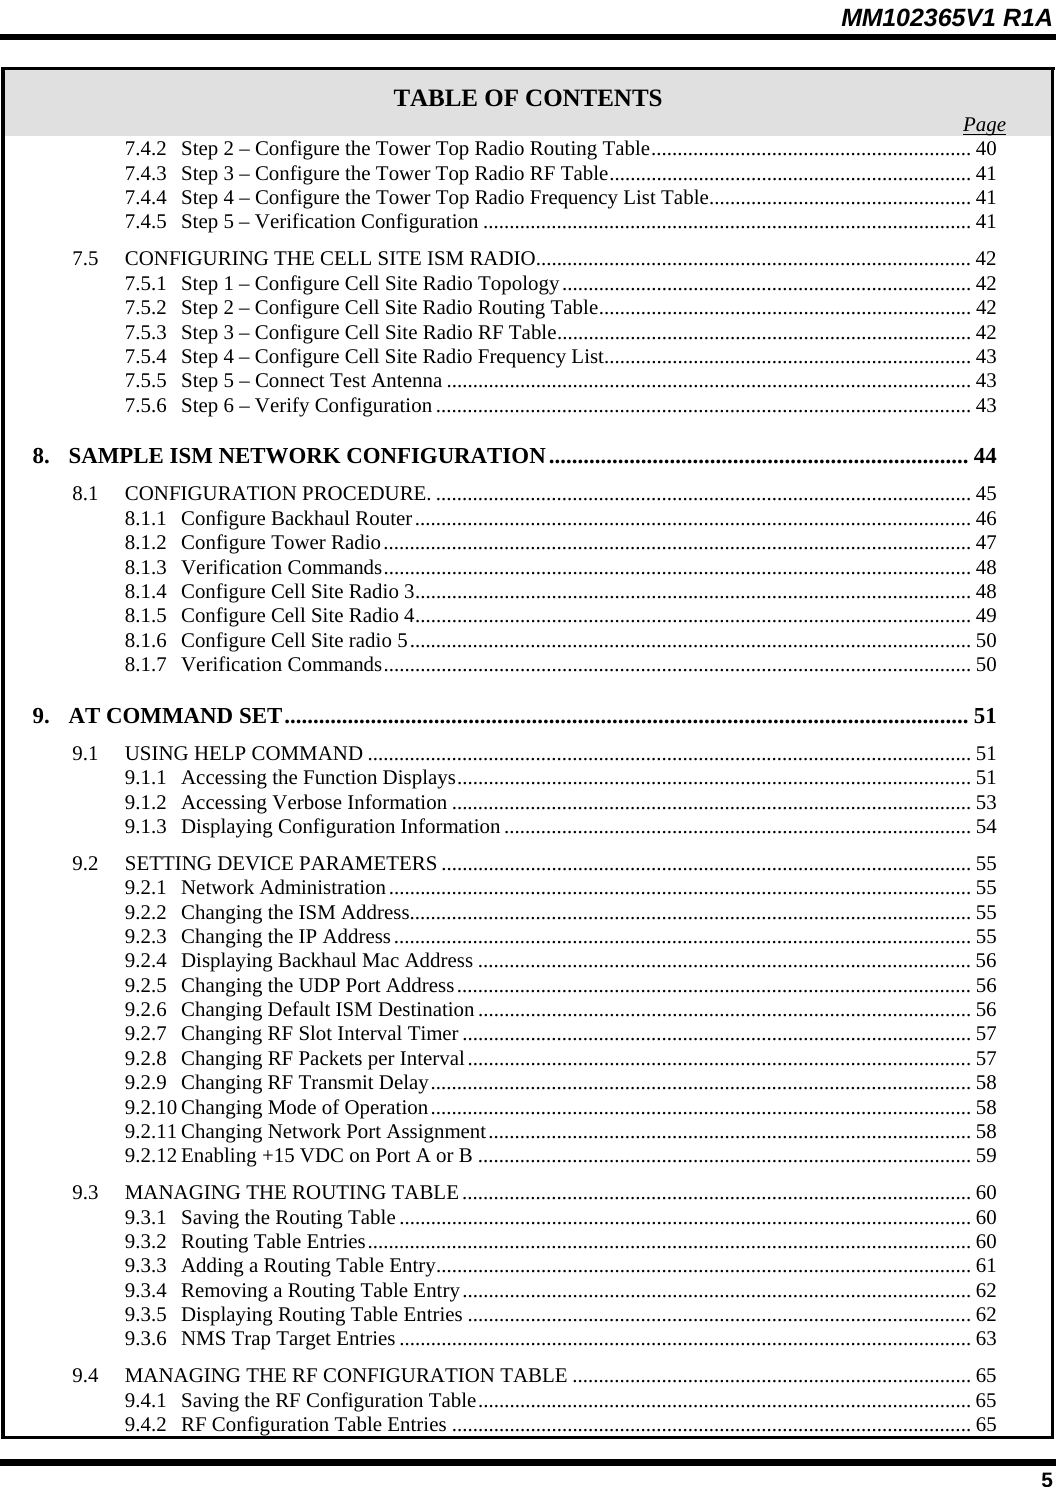 MM102365V1 R1A TABLE OF CONTENTS  Page7.4.2 Step 2 – Configure the Tower Top Radio Routing Table............................................................. 40 7.4.3 Step 3 – Configure the Tower Top Radio RF Table..................................................................... 41 7.4.4 Step 4 – Configure the Tower Top Radio Frequency List Table.................................................. 41 7.4.5 Step 5 – Verification Configuration .............................................................................................41 7.5 CONFIGURING THE CELL SITE ISM RADIO................................................................................... 42 7.5.1 Step 1 – Configure Cell Site Radio Topology.............................................................................. 42 7.5.2 Step 2 – Configure Cell Site Radio Routing Table....................................................................... 42 7.5.3 Step 3 – Configure Cell Site Radio RF Table............................................................................... 42 7.5.4 Step 4 – Configure Cell Site Radio Frequency List...................................................................... 43 7.5.5 Step 5 – Connect Test Antenna .................................................................................................... 43 7.5.6 Step 6 – Verify Configuration ...................................................................................................... 43 8. SAMPLE ISM NETWORK CONFIGURATION......................................................................... 44 8.1 CONFIGURATION PROCEDURE. ...................................................................................................... 45 8.1.1 Configure Backhaul Router.......................................................................................................... 46 8.1.2 Configure Tower Radio................................................................................................................ 47 8.1.3 Verification Commands................................................................................................................ 48 8.1.4 Configure Cell Site Radio 3.......................................................................................................... 48 8.1.5 Configure Cell Site Radio 4.......................................................................................................... 49 8.1.6 Configure Cell Site radio 5........................................................................................................... 50 8.1.7 Verification Commands................................................................................................................ 50 9. AT COMMAND SET....................................................................................................................... 51 9.1 USING HELP COMMAND ................................................................................................................... 51 9.1.1 Accessing the Function Displays.................................................................................................. 51 9.1.2 Accessing Verbose Information ...................................................................................................53 9.1.3 Displaying Configuration Information......................................................................................... 54 9.2 SETTING DEVICE PARAMETERS ..................................................................................................... 55 9.2.1 Network Administration............................................................................................................... 55 9.2.2 Changing the ISM Address........................................................................................................... 55 9.2.3 Changing the IP Address.............................................................................................................. 55 9.2.4 Displaying Backhaul Mac Address .............................................................................................. 56 9.2.5 Changing the UDP Port Address.................................................................................................. 56 9.2.6 Changing Default ISM Destination .............................................................................................. 56 9.2.7 Changing RF Slot Interval Timer.................................................................................................57 9.2.8 Changing RF Packets per Interval................................................................................................57 9.2.9 Changing RF Transmit Delay....................................................................................................... 58 9.2.10 Changing Mode of Operation....................................................................................................... 58 9.2.11 Changing Network Port Assignment............................................................................................ 58 9.2.12 Enabling +15 VDC on Port A or B .............................................................................................. 59 9.3 MANAGING THE ROUTING TABLE................................................................................................. 60 9.3.1 Saving the Routing Table ............................................................................................................. 60 9.3.2 Routing Table Entries................................................................................................................... 60 9.3.3 Adding a Routing Table Entry...................................................................................................... 61 9.3.4 Removing a Routing Table Entry................................................................................................. 62 9.3.5 Displaying Routing Table Entries ................................................................................................62 9.3.6 NMS Trap Target Entries ............................................................................................................. 63 9.4 MANAGING THE RF CONFIGURATION TABLE ............................................................................ 65 9.4.1 Saving the RF Configuration Table.............................................................................................. 65 9.4.2 RF Configuration Table Entries ................................................................................................... 65  5 